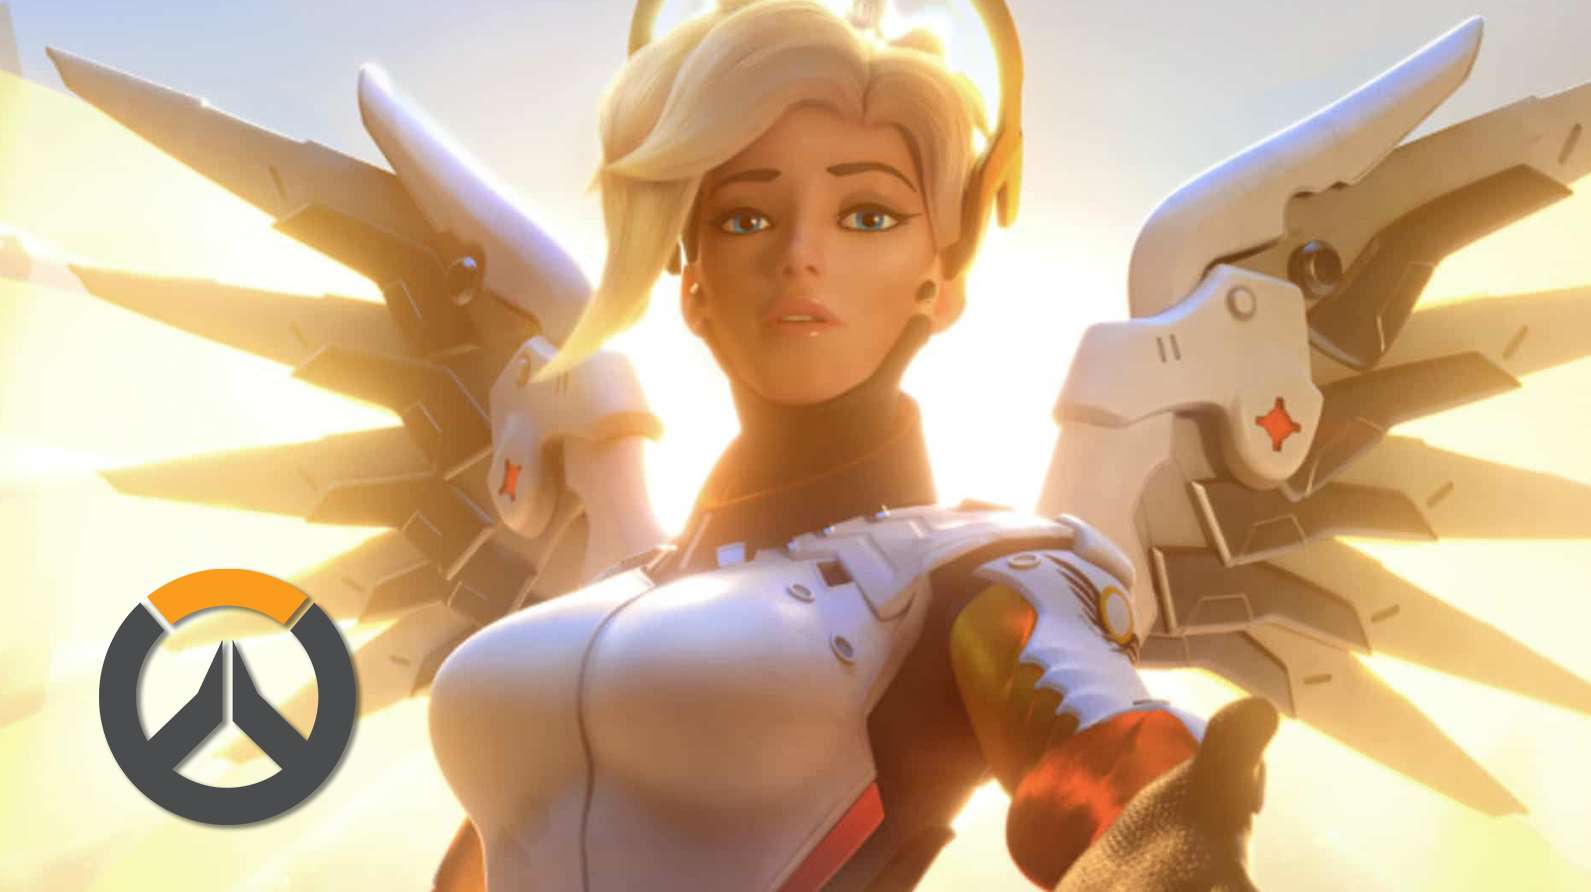 Overwatch's Mercy reaches her hand out